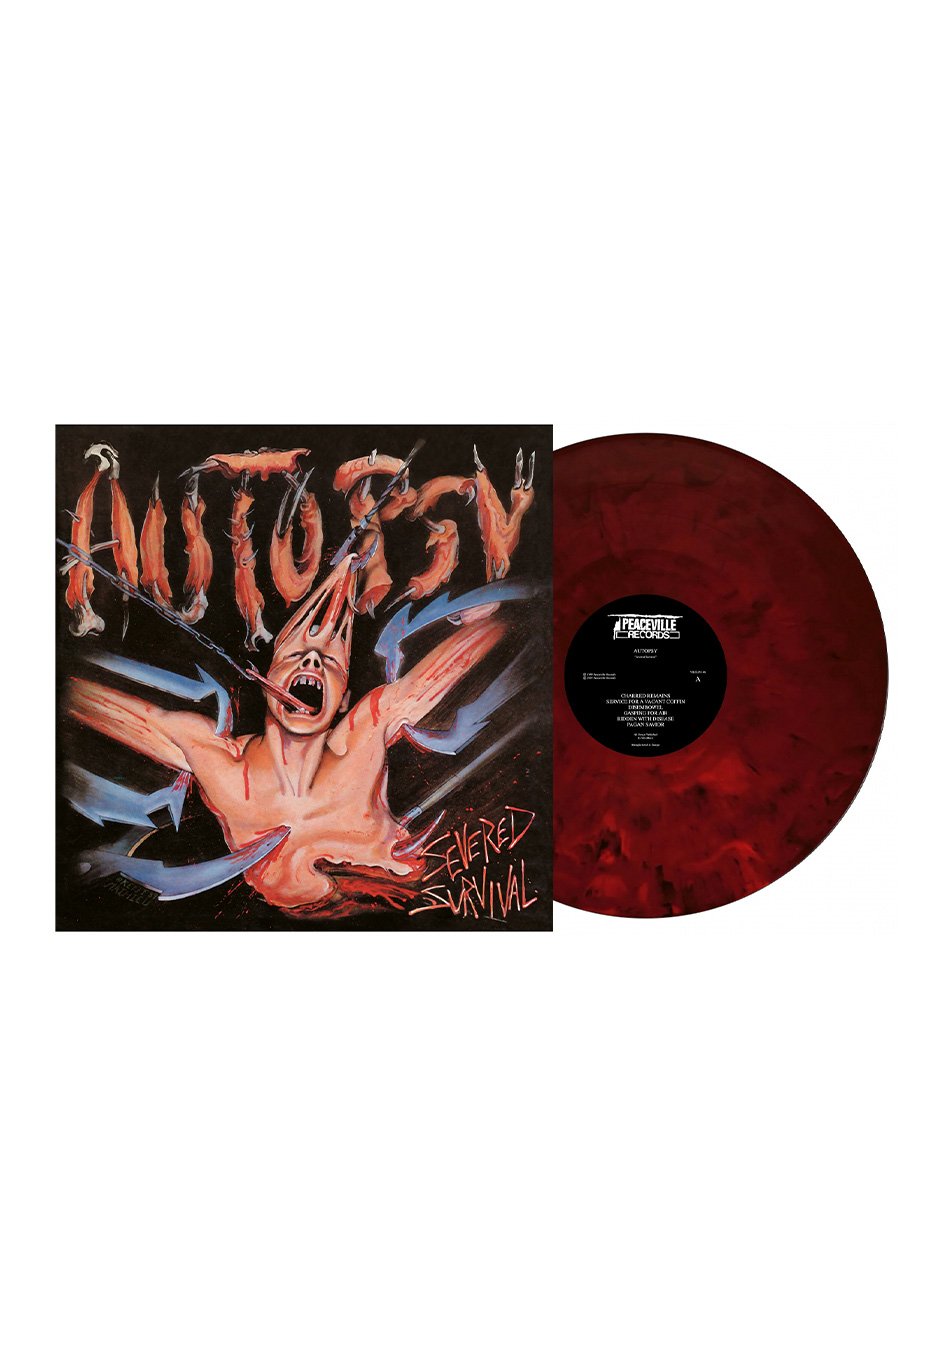 Autopsy - Severed Survival (35th Anniversary - Red Cover) Ltd. Red/Black - Marbled Vinyl